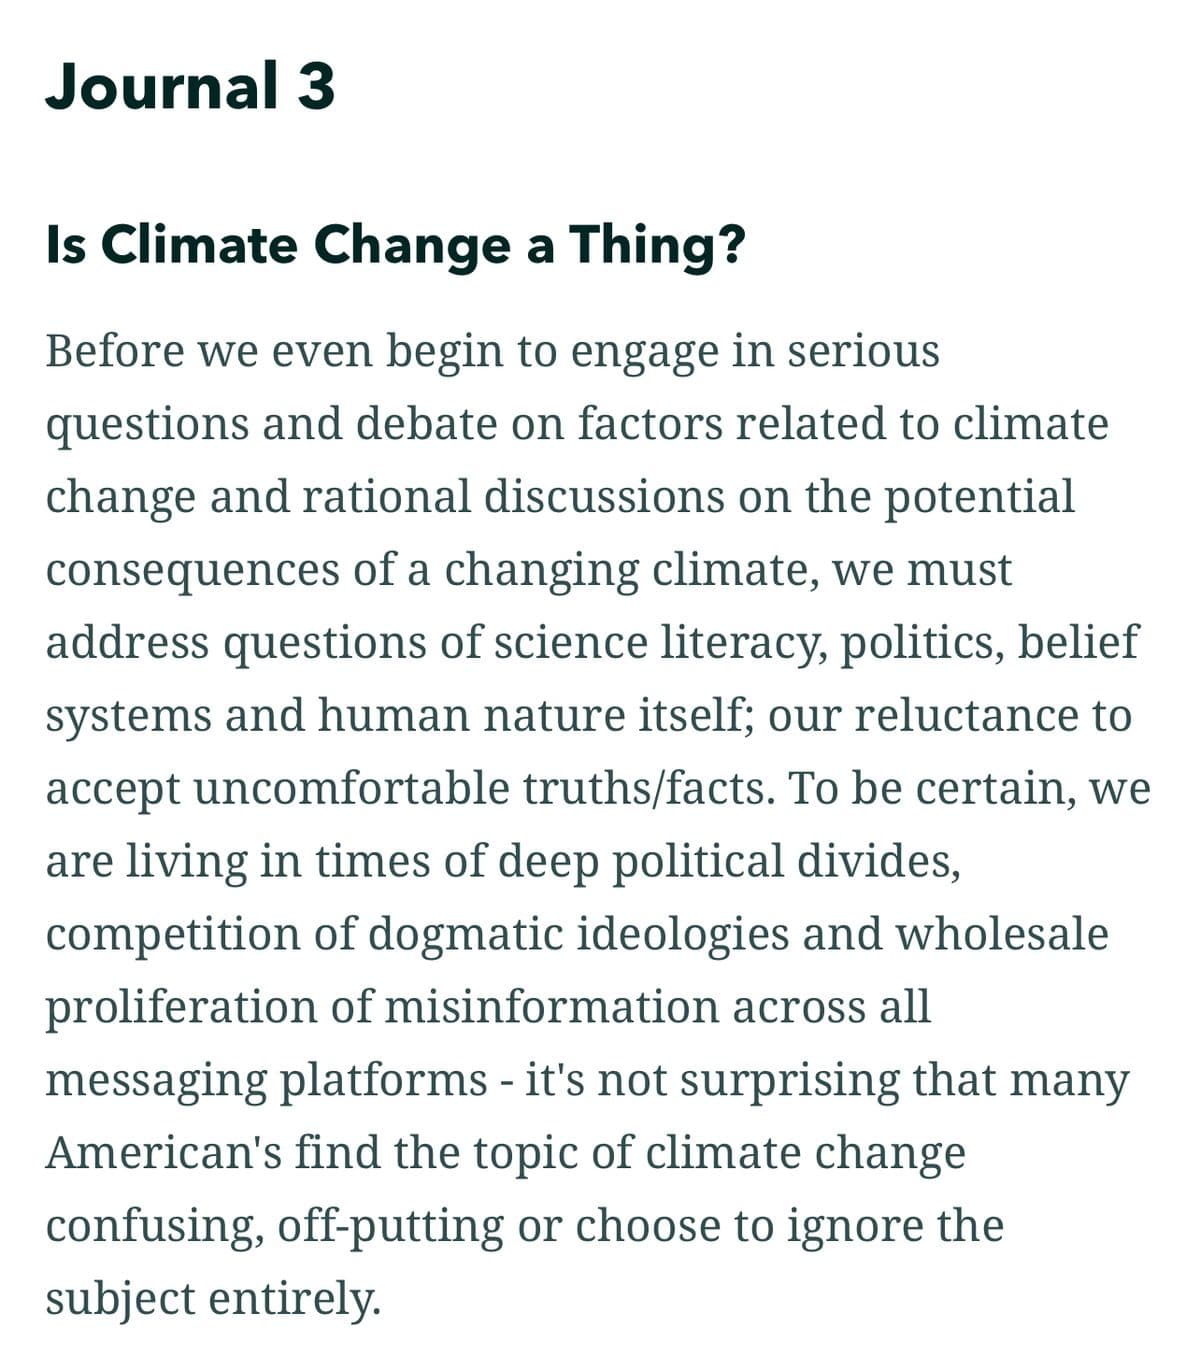 Journal 3
Is Climate Change a Thing?
Before we even begin to engage in serious
questions and debate on factors related to climate
change and rational discussions on the potential
consequences of a changing climate, we must
address questions of science literacy, politics, belief
systems and human nature itself; our reluctance to
accept uncomfortable truths/facts. To be certain, we
are living in times of deep political divides,
competition of dogmatic ideologies and wholesale
proliferation of misinformation across all
messaging platforms - it's not surprising that many
American's find the topic of climate change
confusing, off-putting or choose to ignore the
subject entirely.